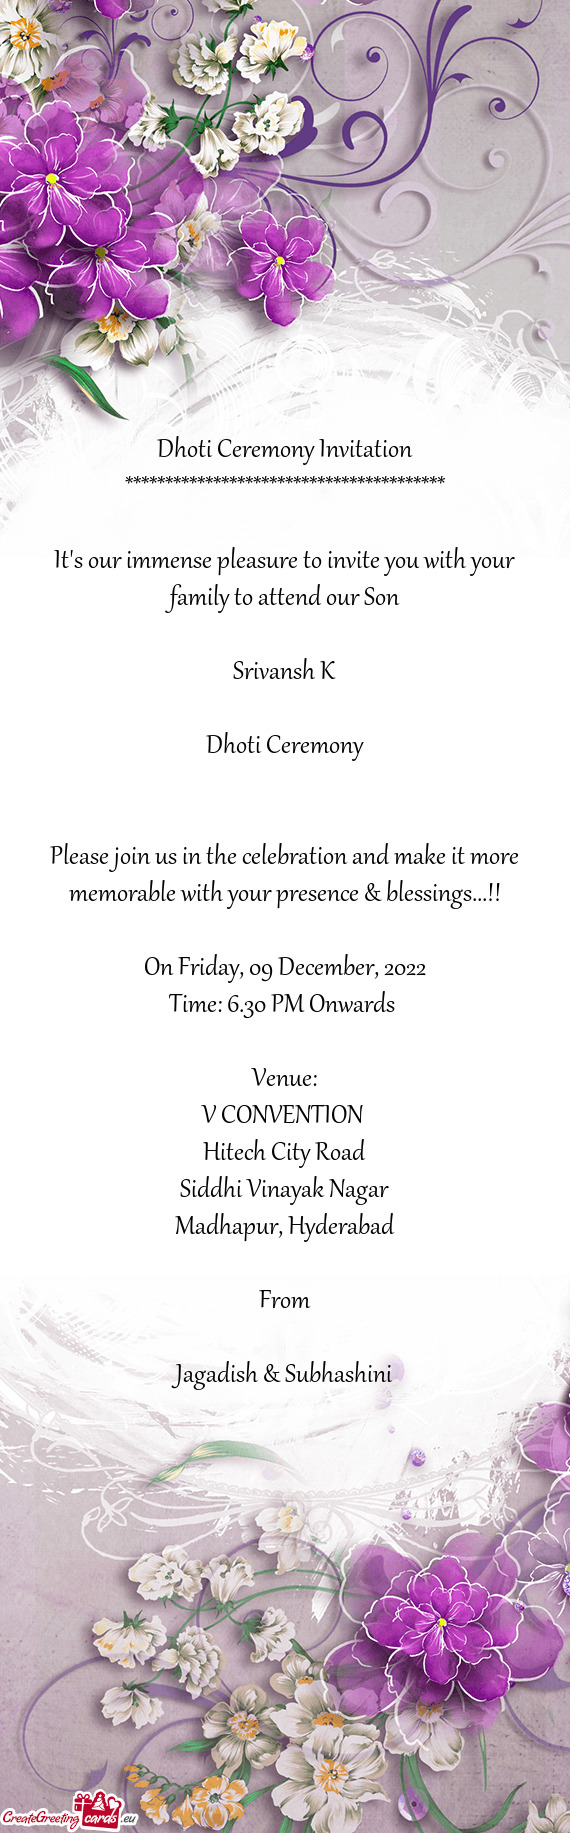 Please join us in the celebration and make it more memorable with your presence & blessings